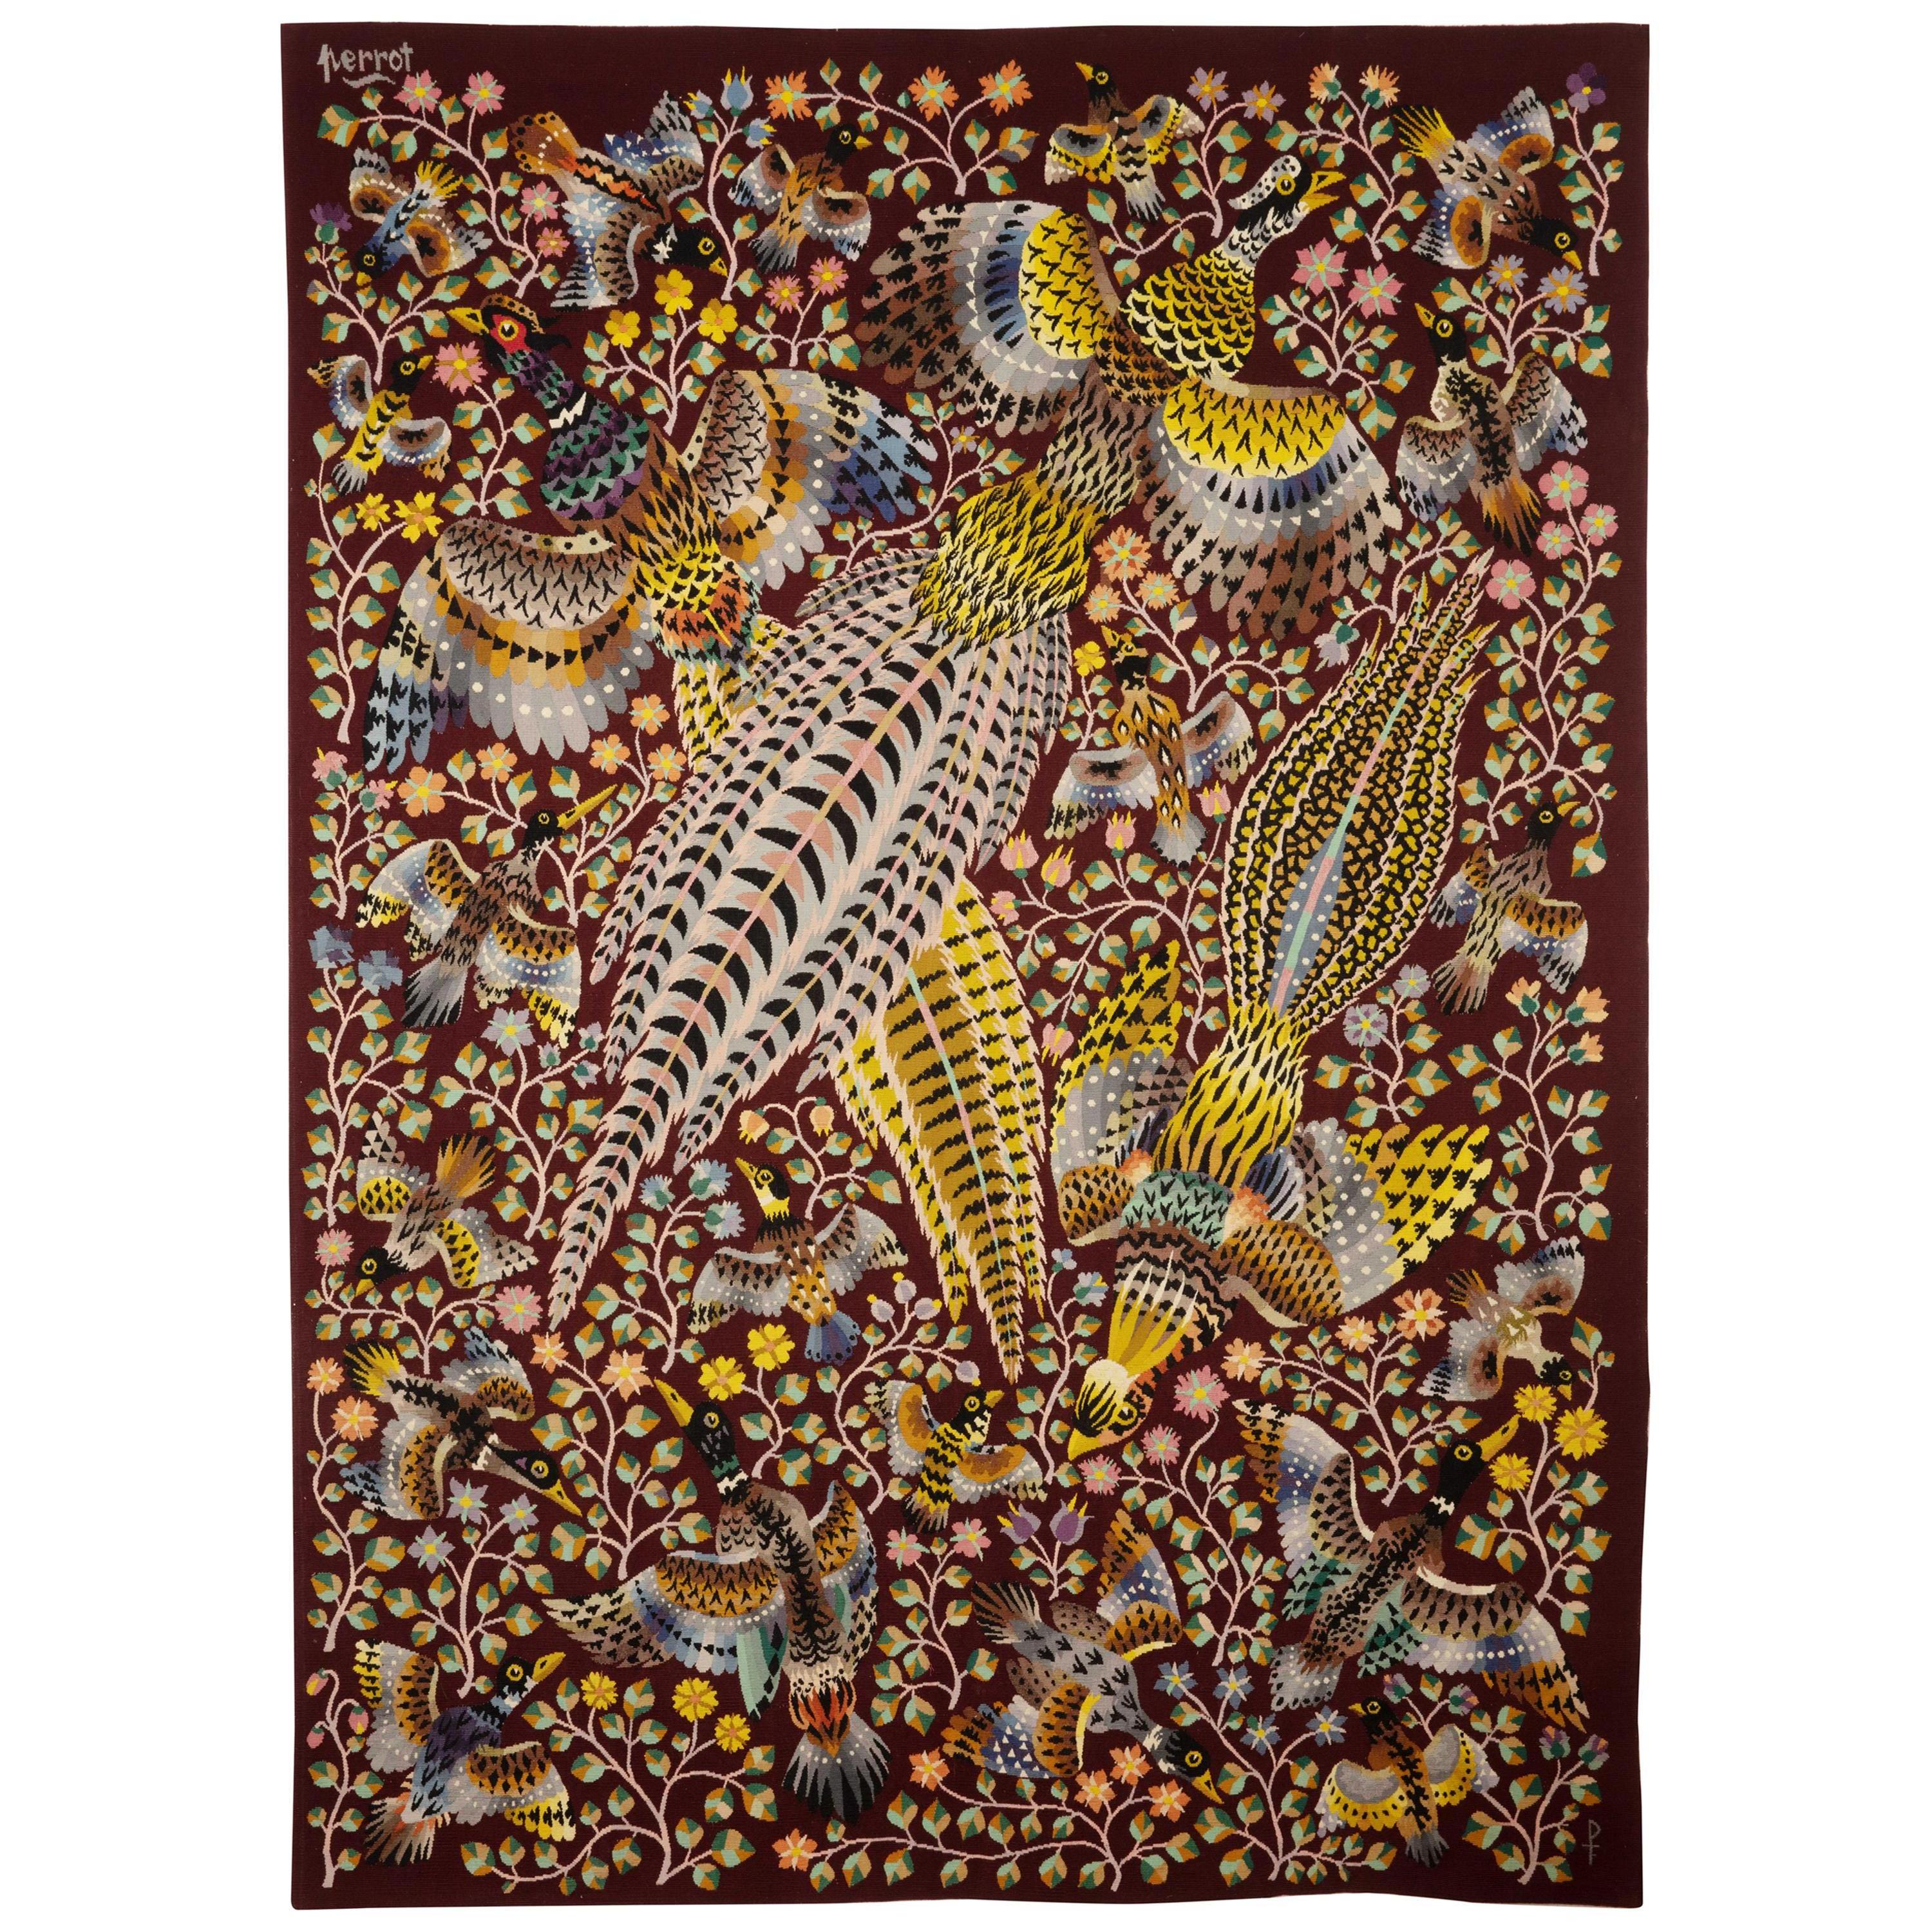 Tapestry by French artist René Perrot “Three pheasants”, wool, France